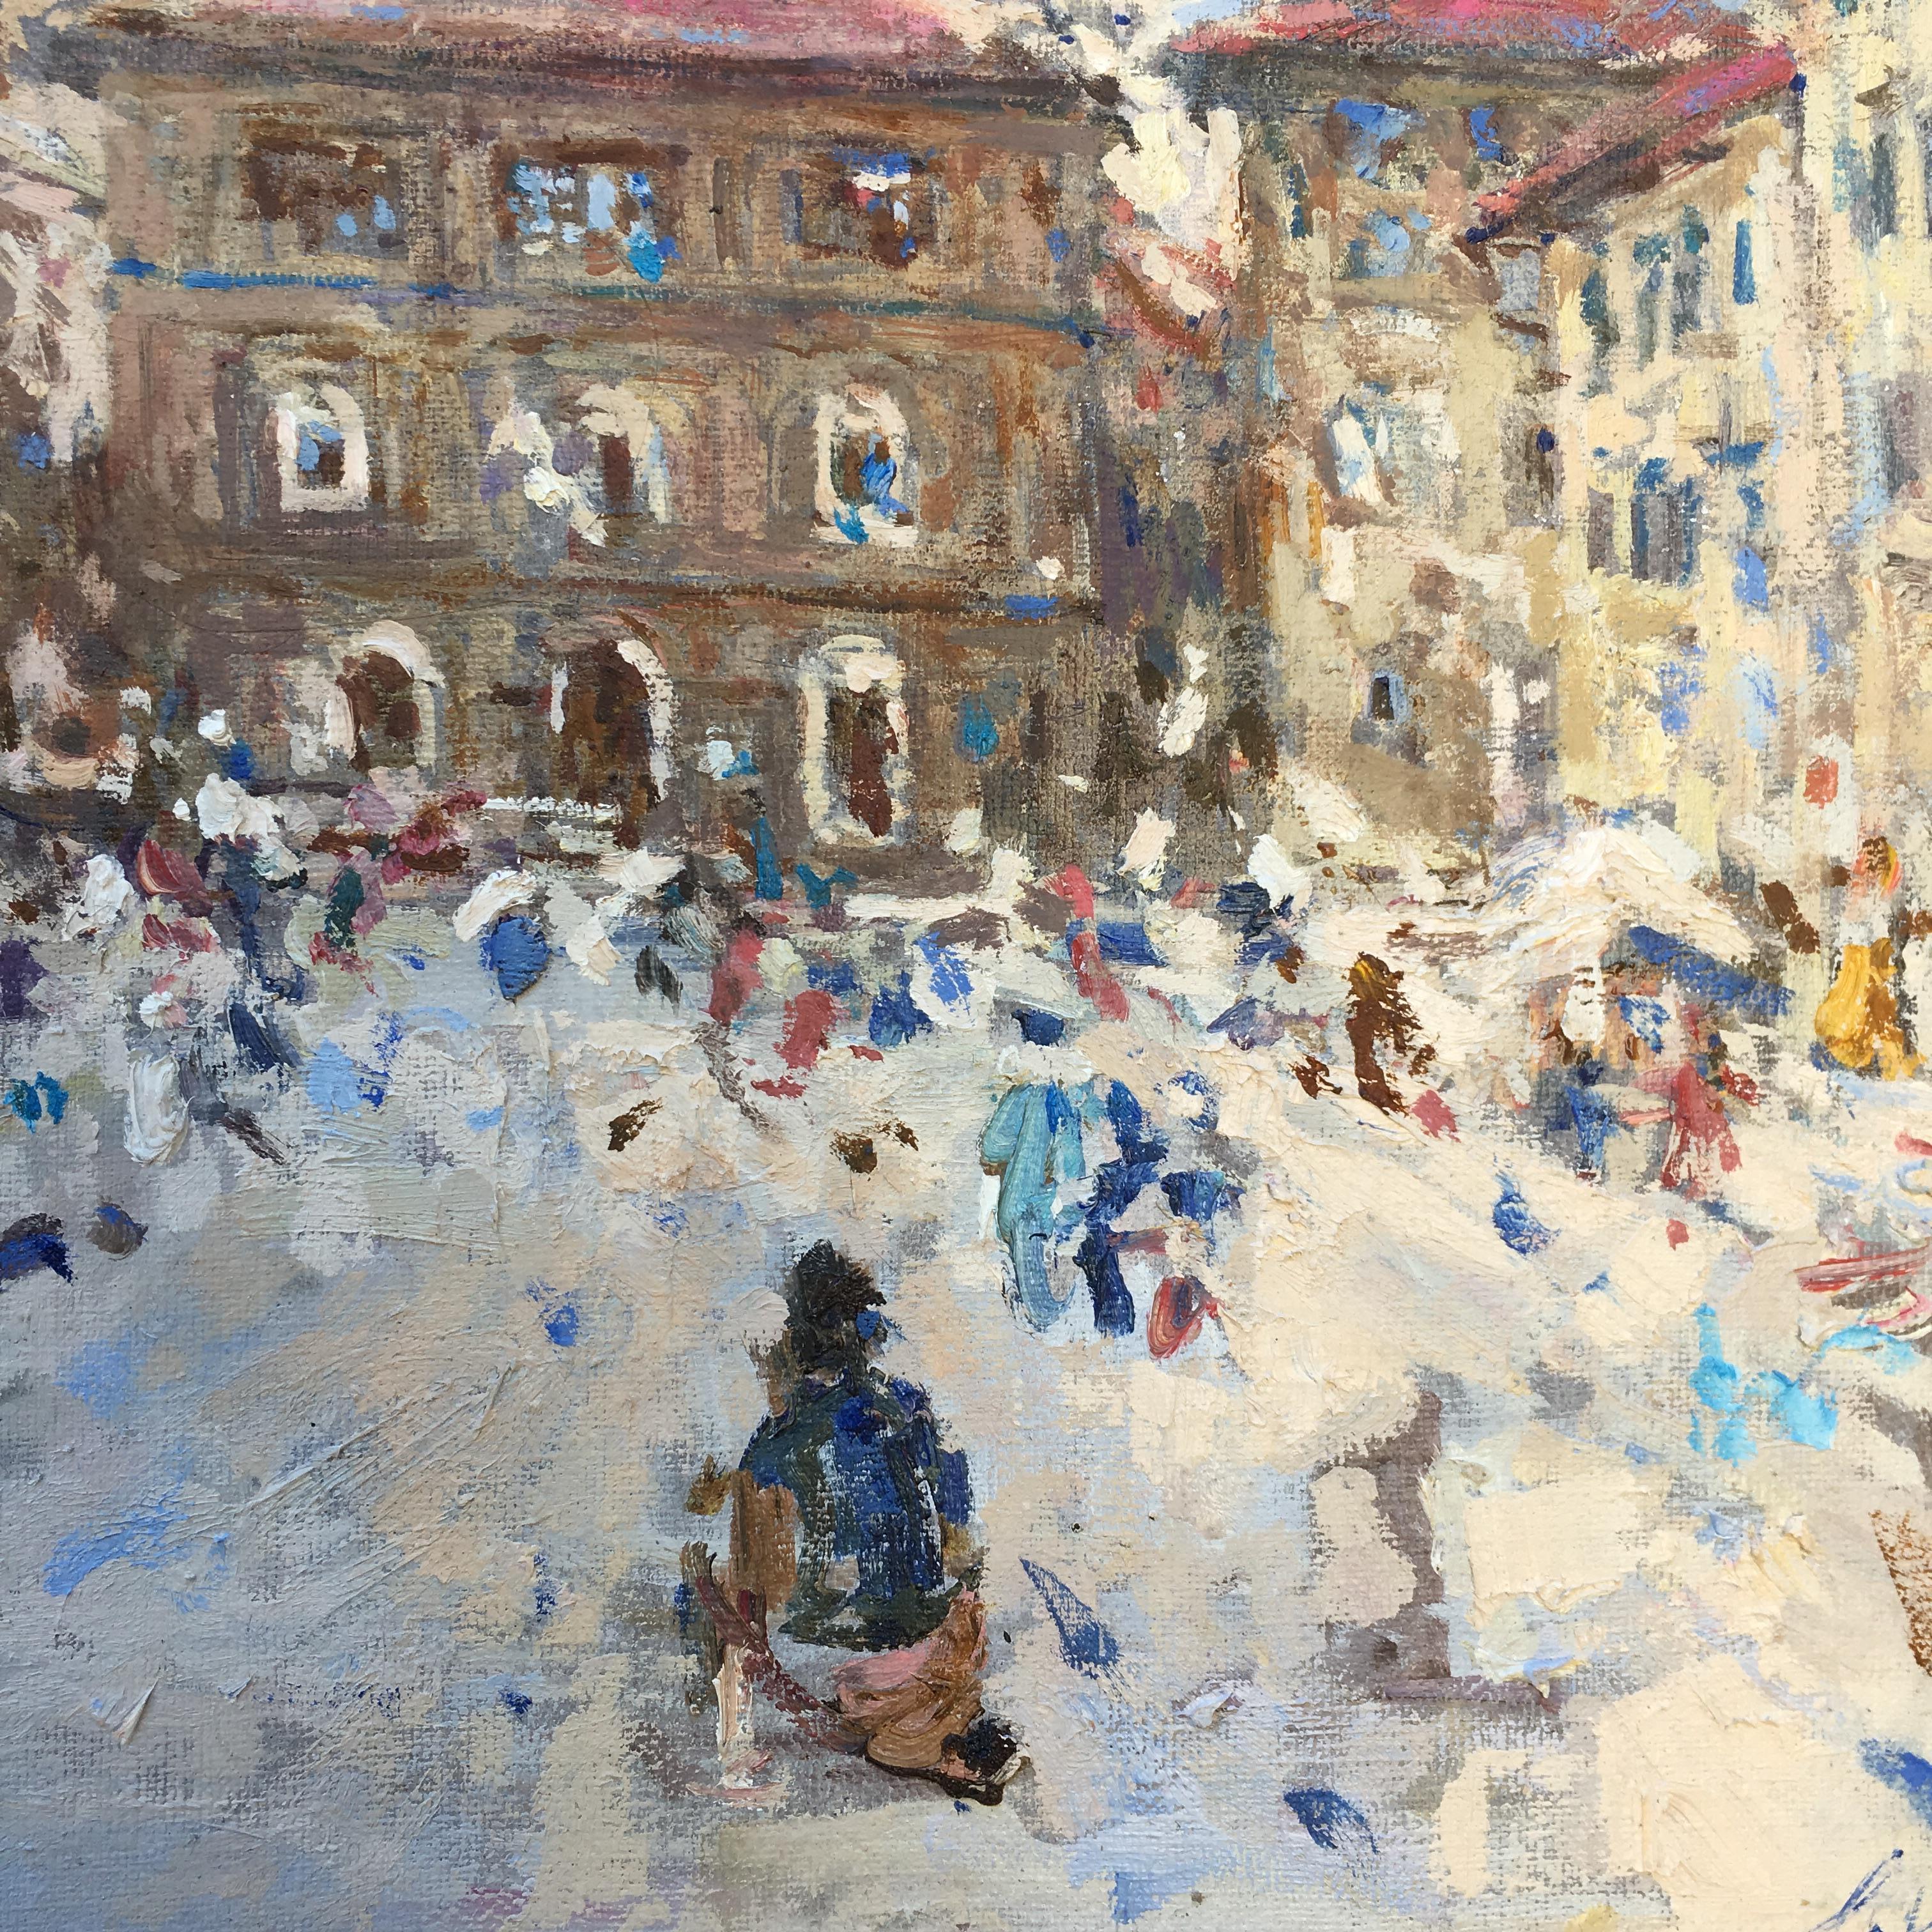 Piazza in Firenze - Post-Impressionist Painting by Valeria Lakrisenko